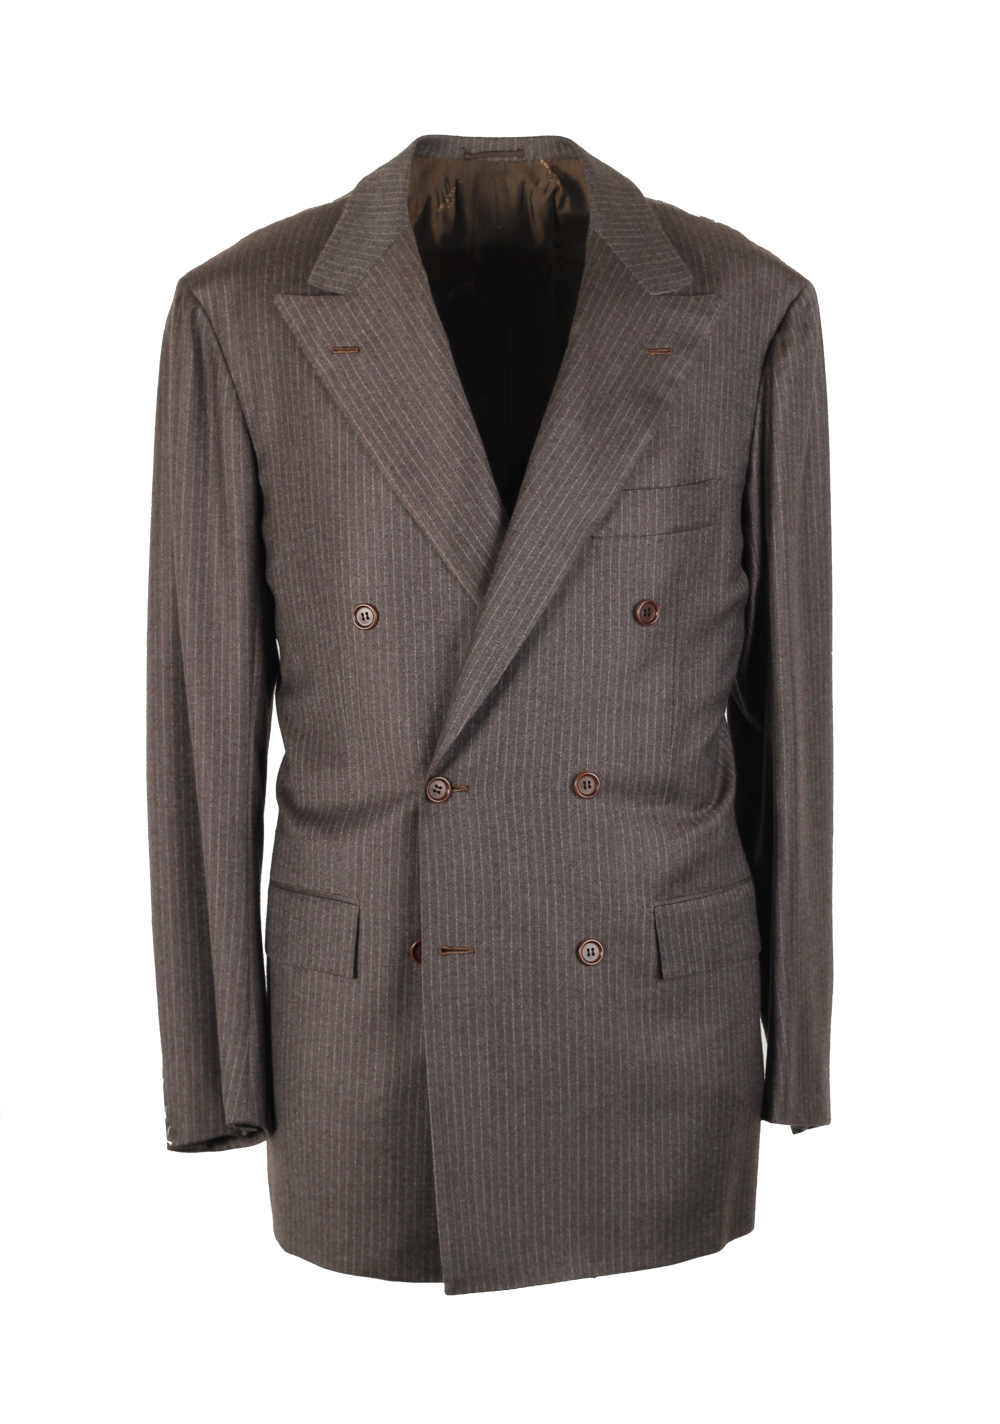 Kiton Suit Size 50 / 40R U.S. 100% Cashmere Double Breasted | Costume ...